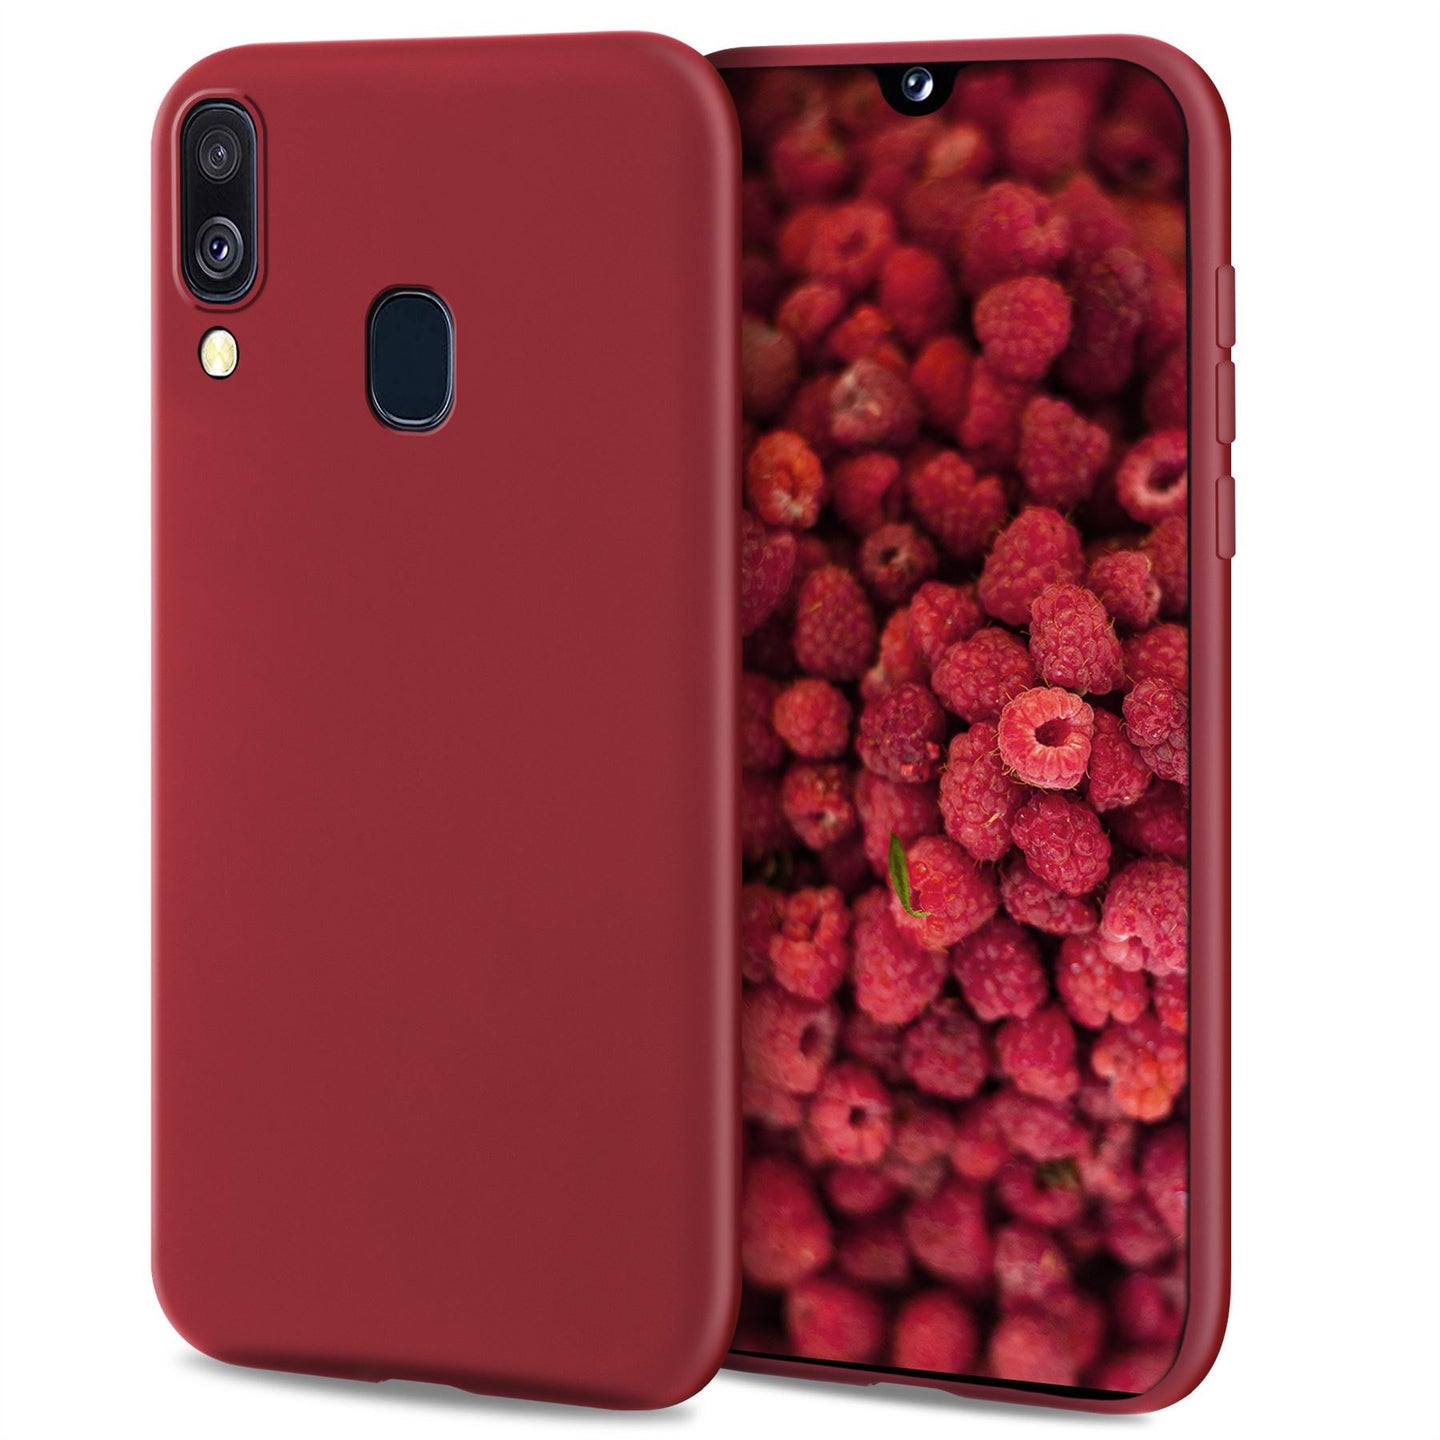 Moozy Lifestyle. Designed for Samsung A40 Case, Vintage Pink - Liquid Silicone Cover with Matte Finish and Soft Microfiber Lining